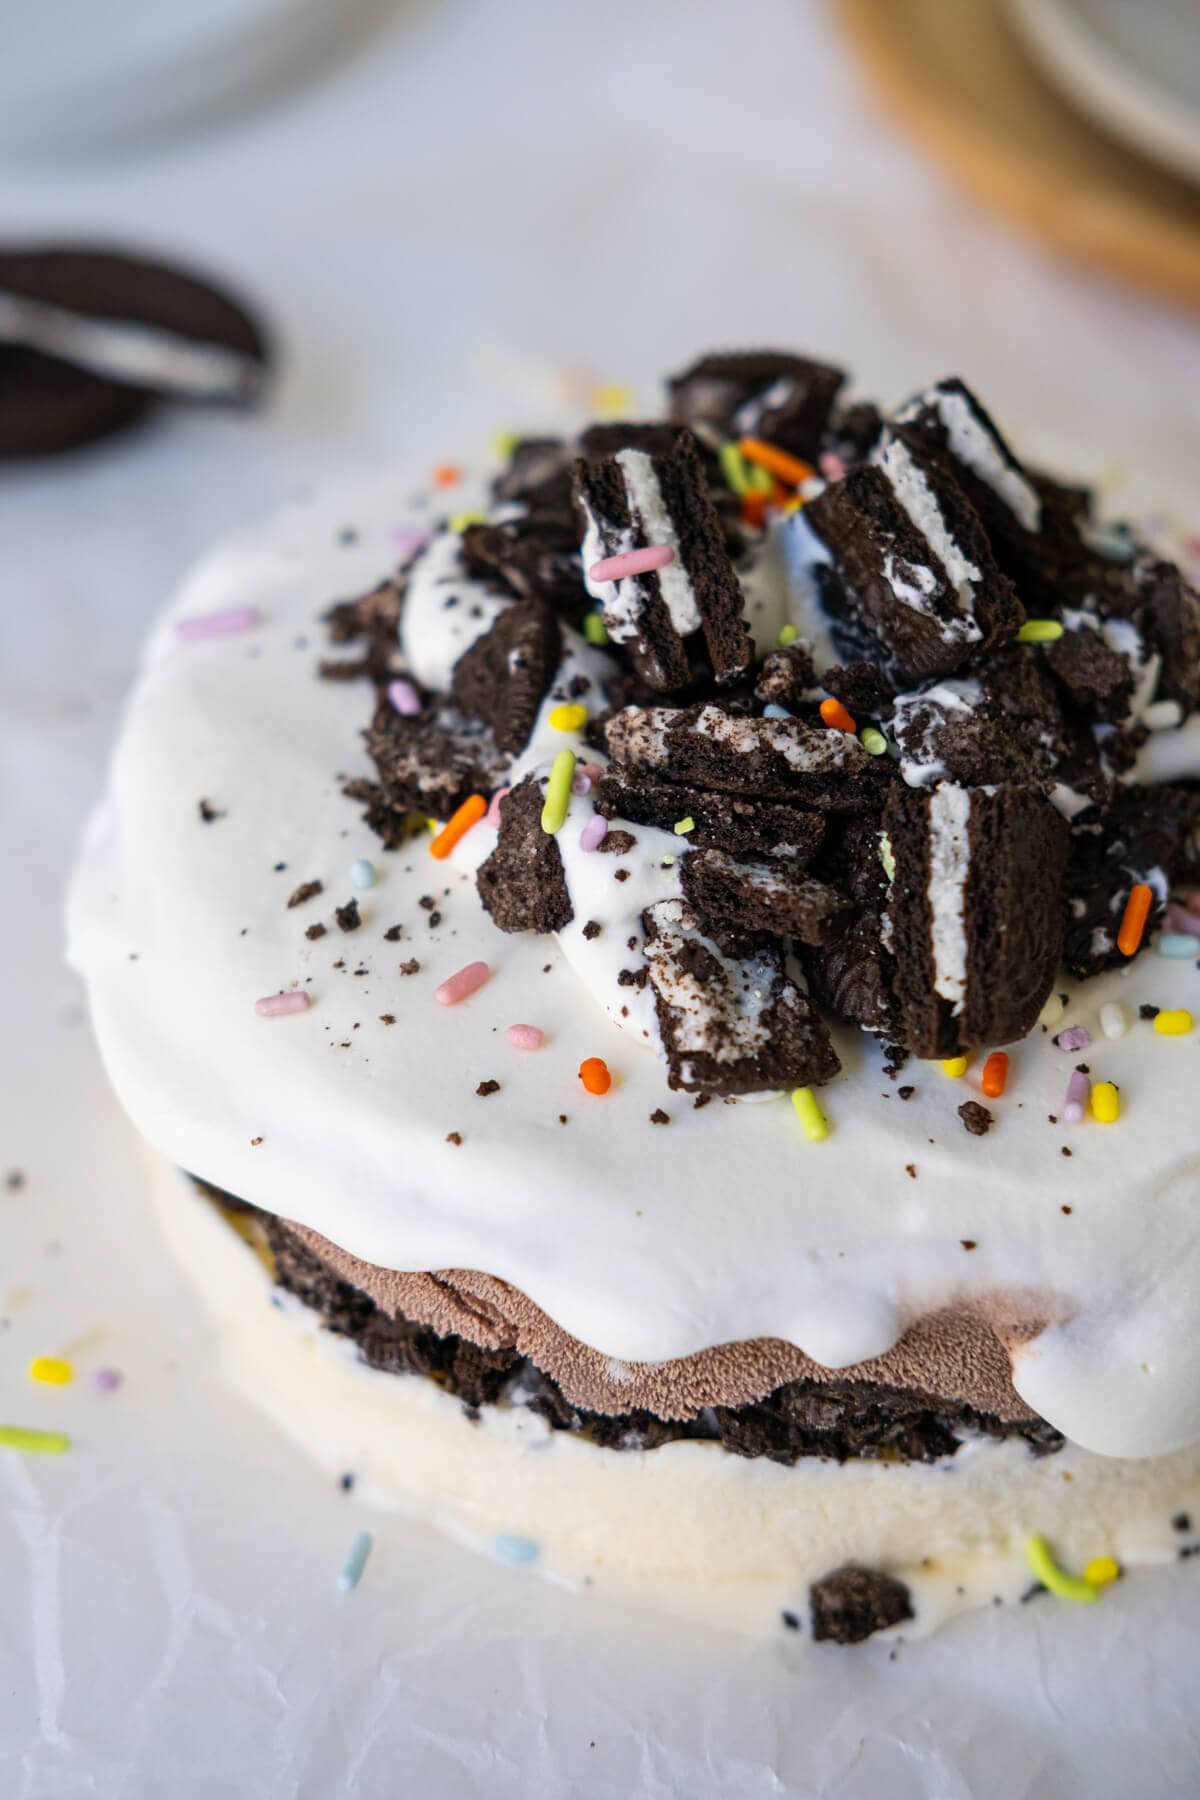 Cake made out of ice cream with Oreo crumbs and sprinkles on top.